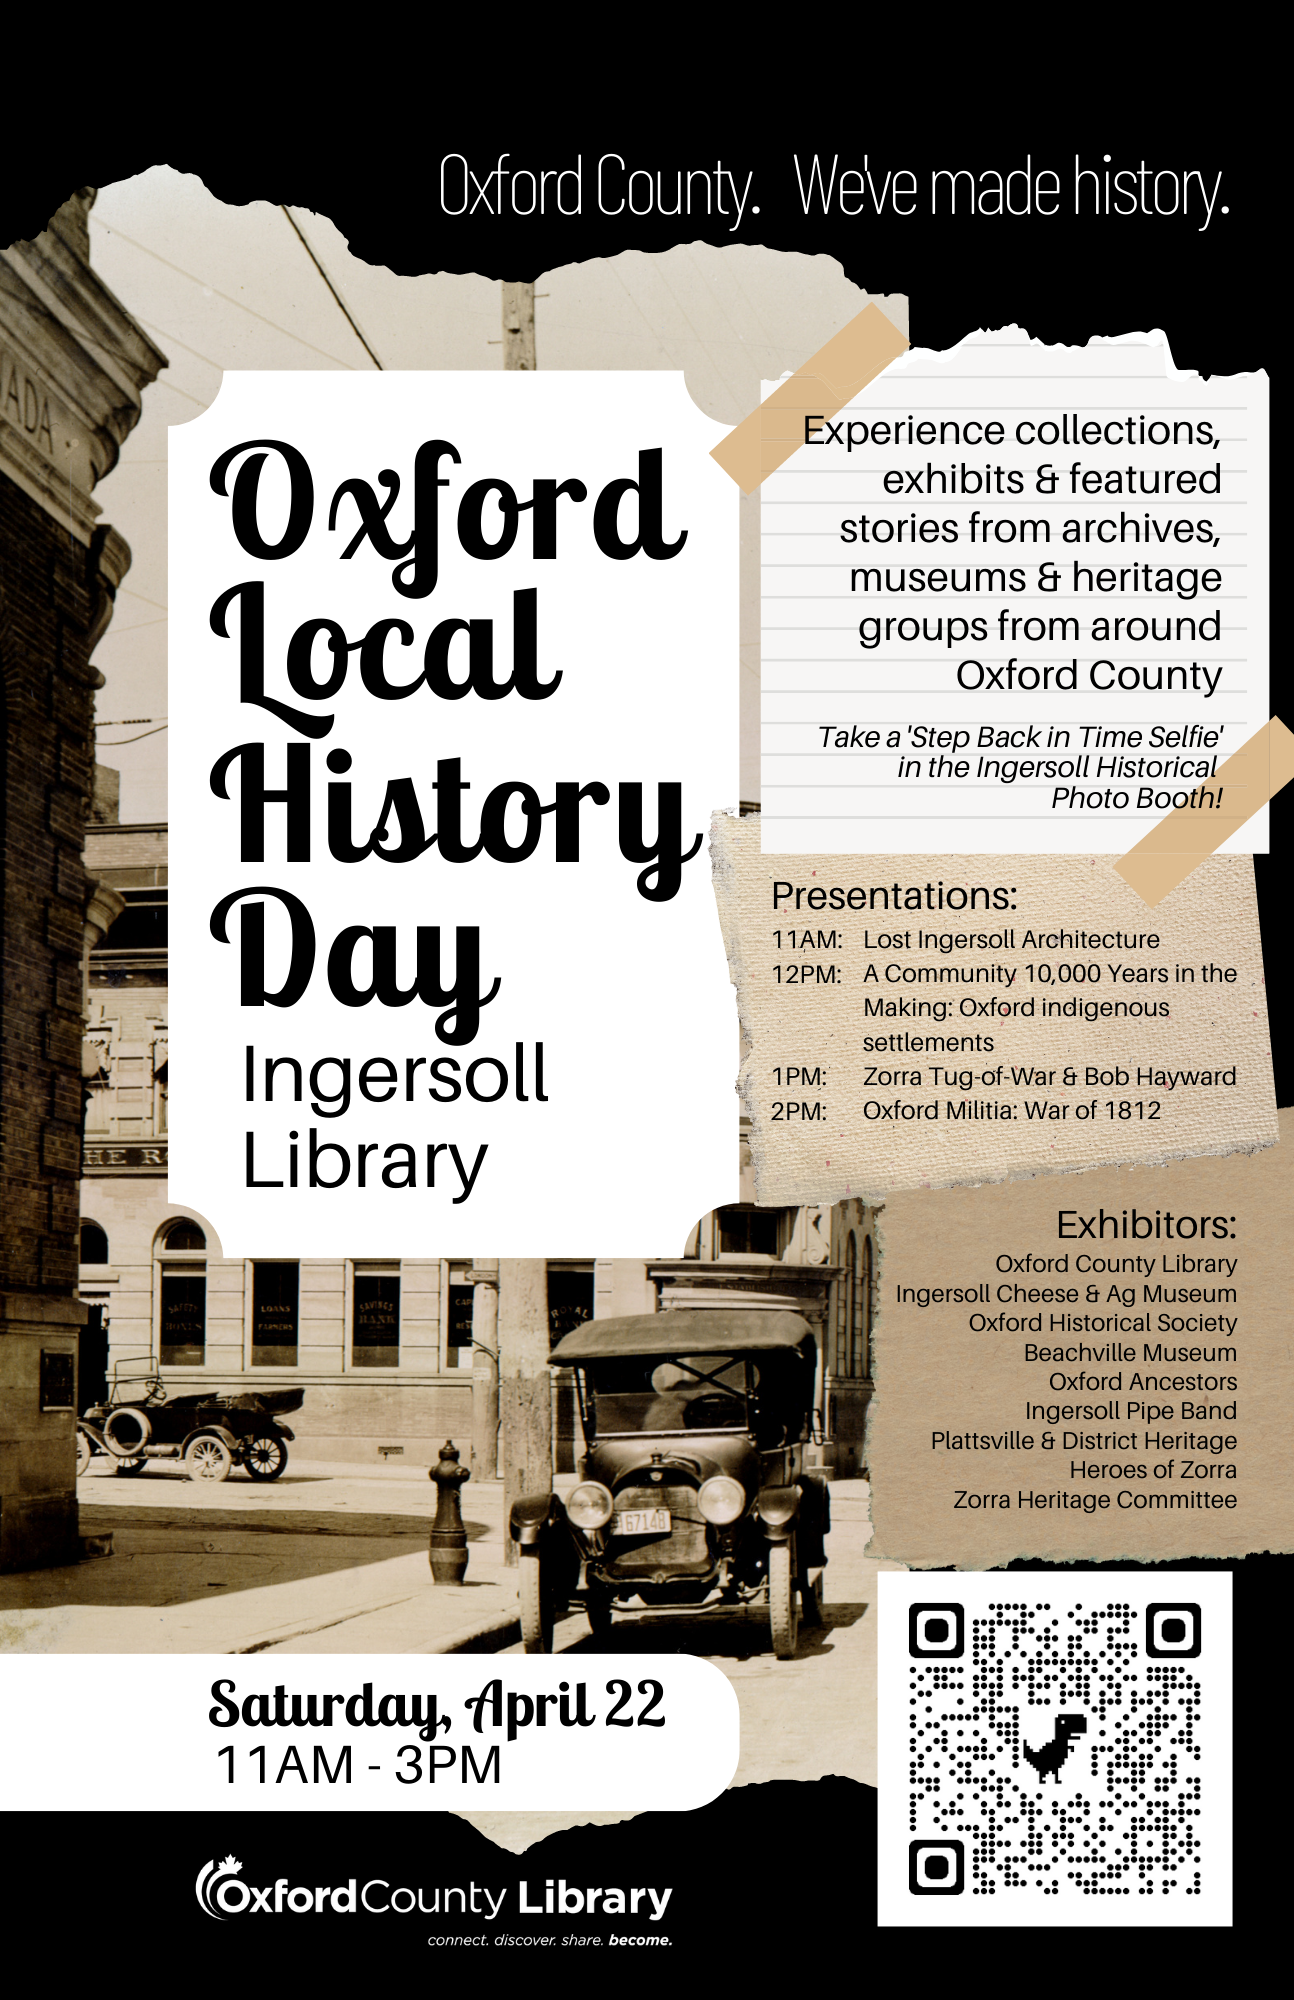 Oxford Local History Day poster for Ingersoll